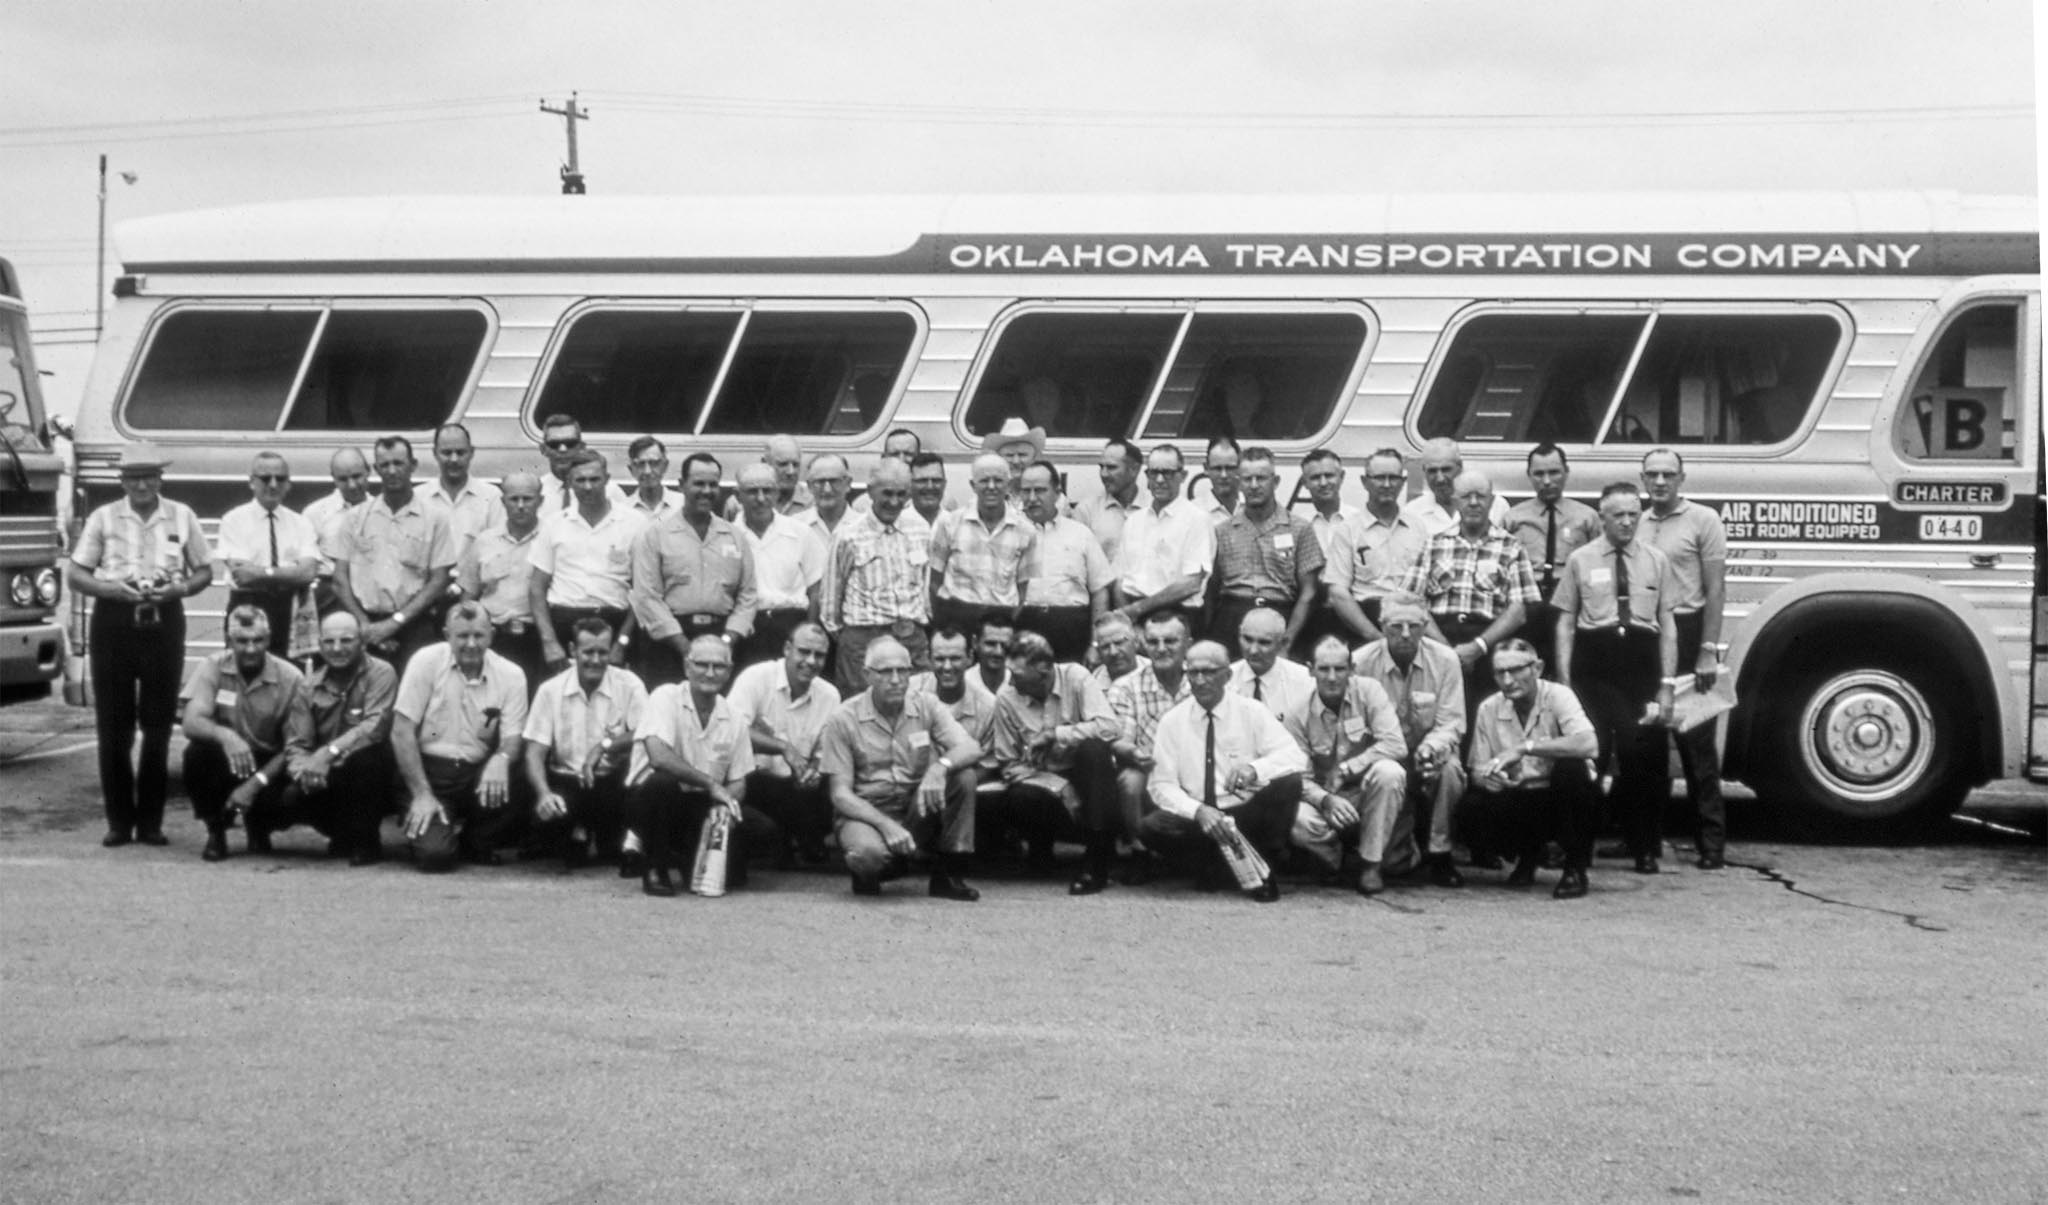 Fifty-two Oklahomans participated in a three-state Farm Bureau leaders tour in July, joining fellow FB leaders from Texas and Artkansas on a five-day tour of county farm bureaus in Kansas, Iowa, and Illinois. Shown here by one of the two buses are the county leaders, state board members and enough staff members to handle the necessary details.